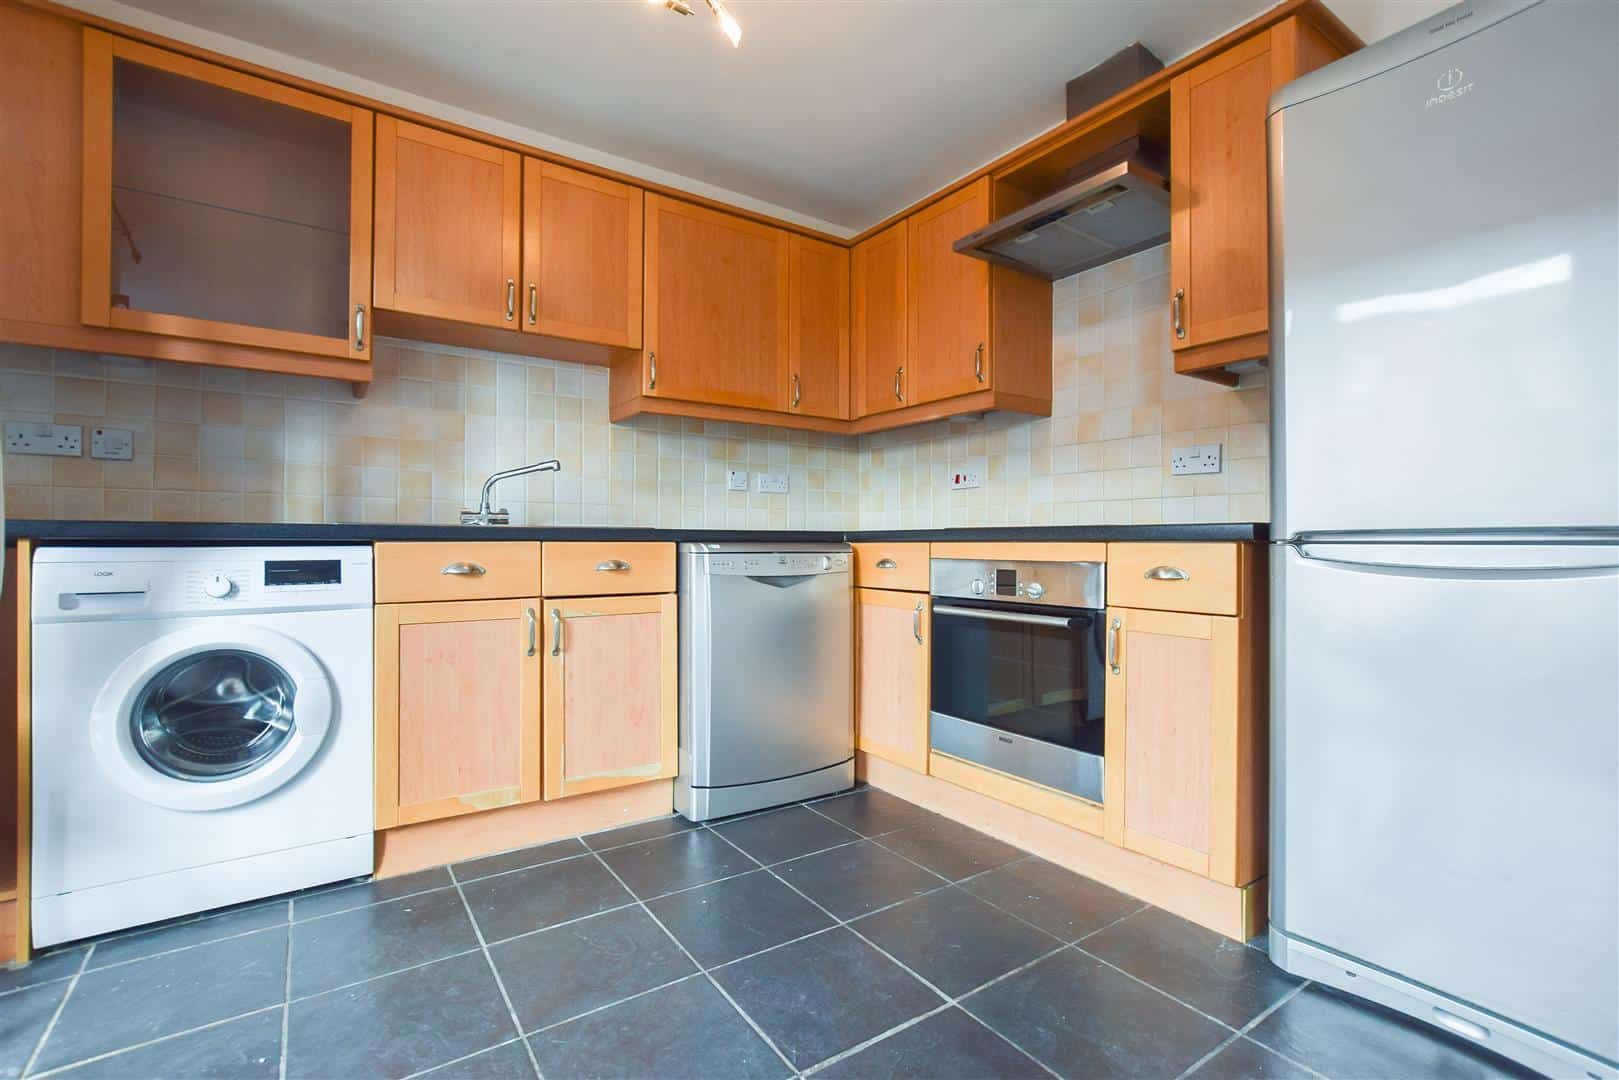 Hirst Crescent, Wembley, Middlesex, HA9 7HE